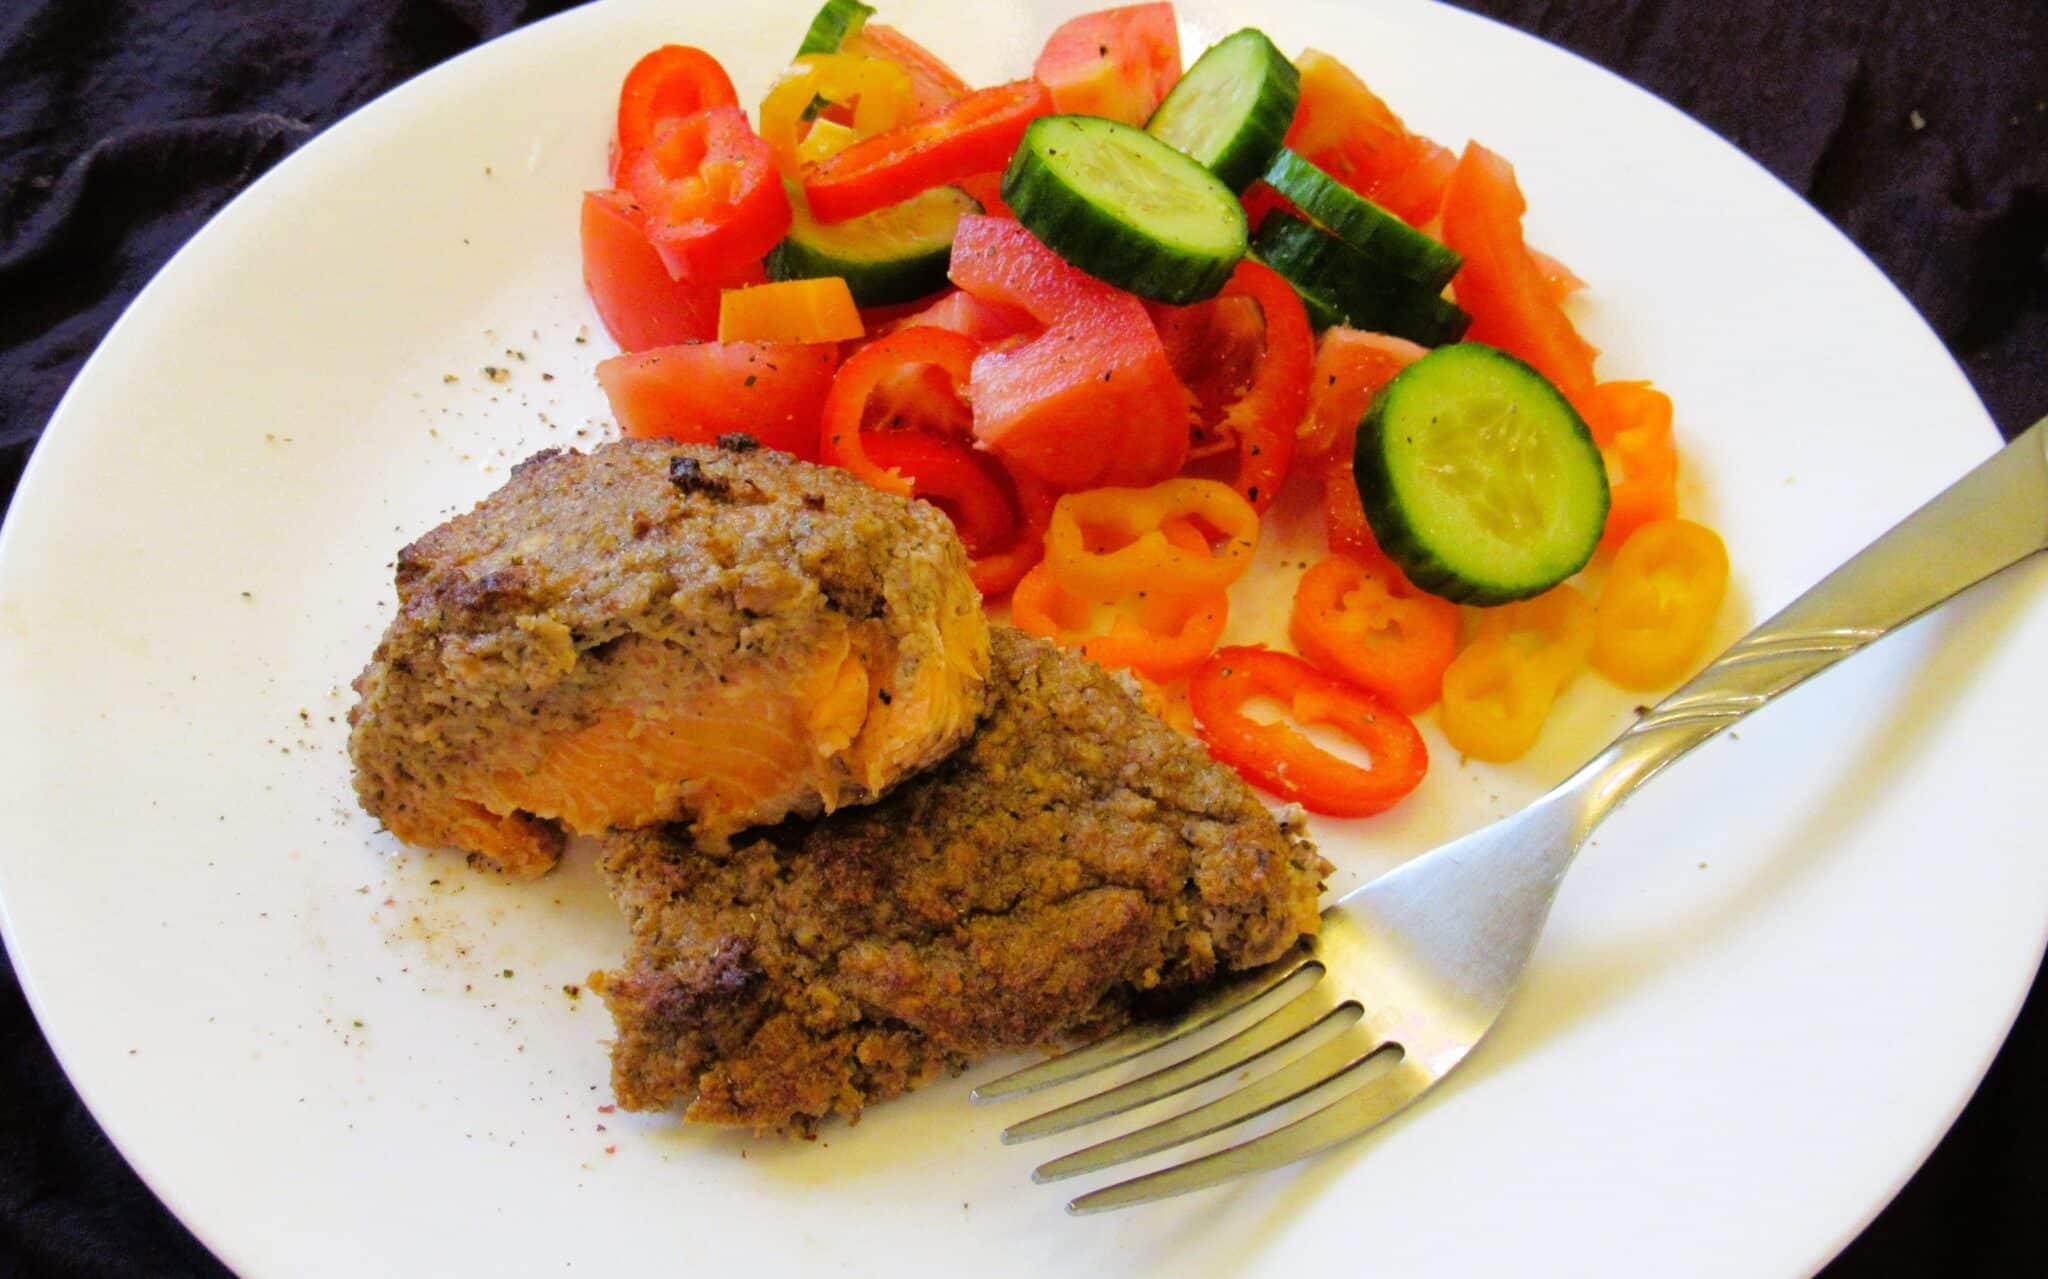 the walnut crust baked salmon on a plate with fresh salad and fork